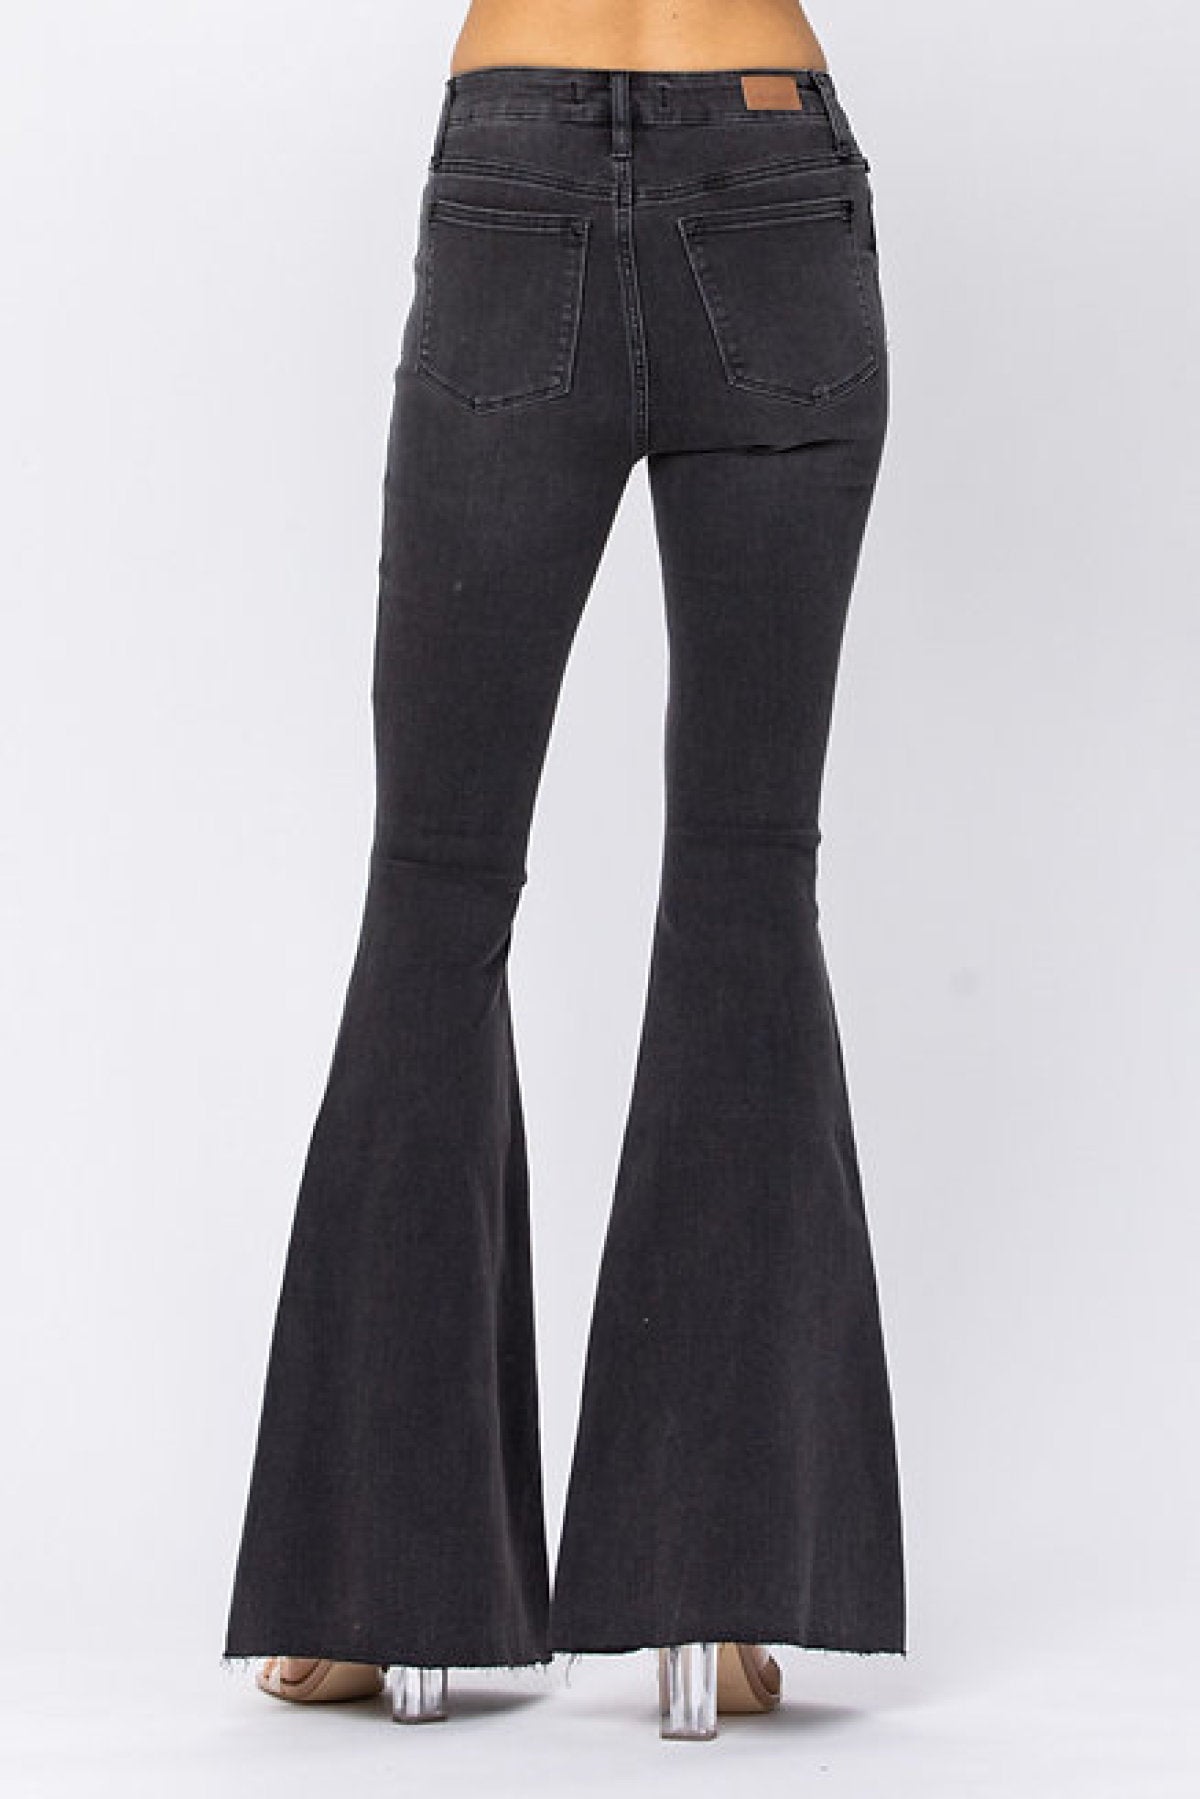 Judy Blue Black Wash Mid-Rise Super Flare Jeans